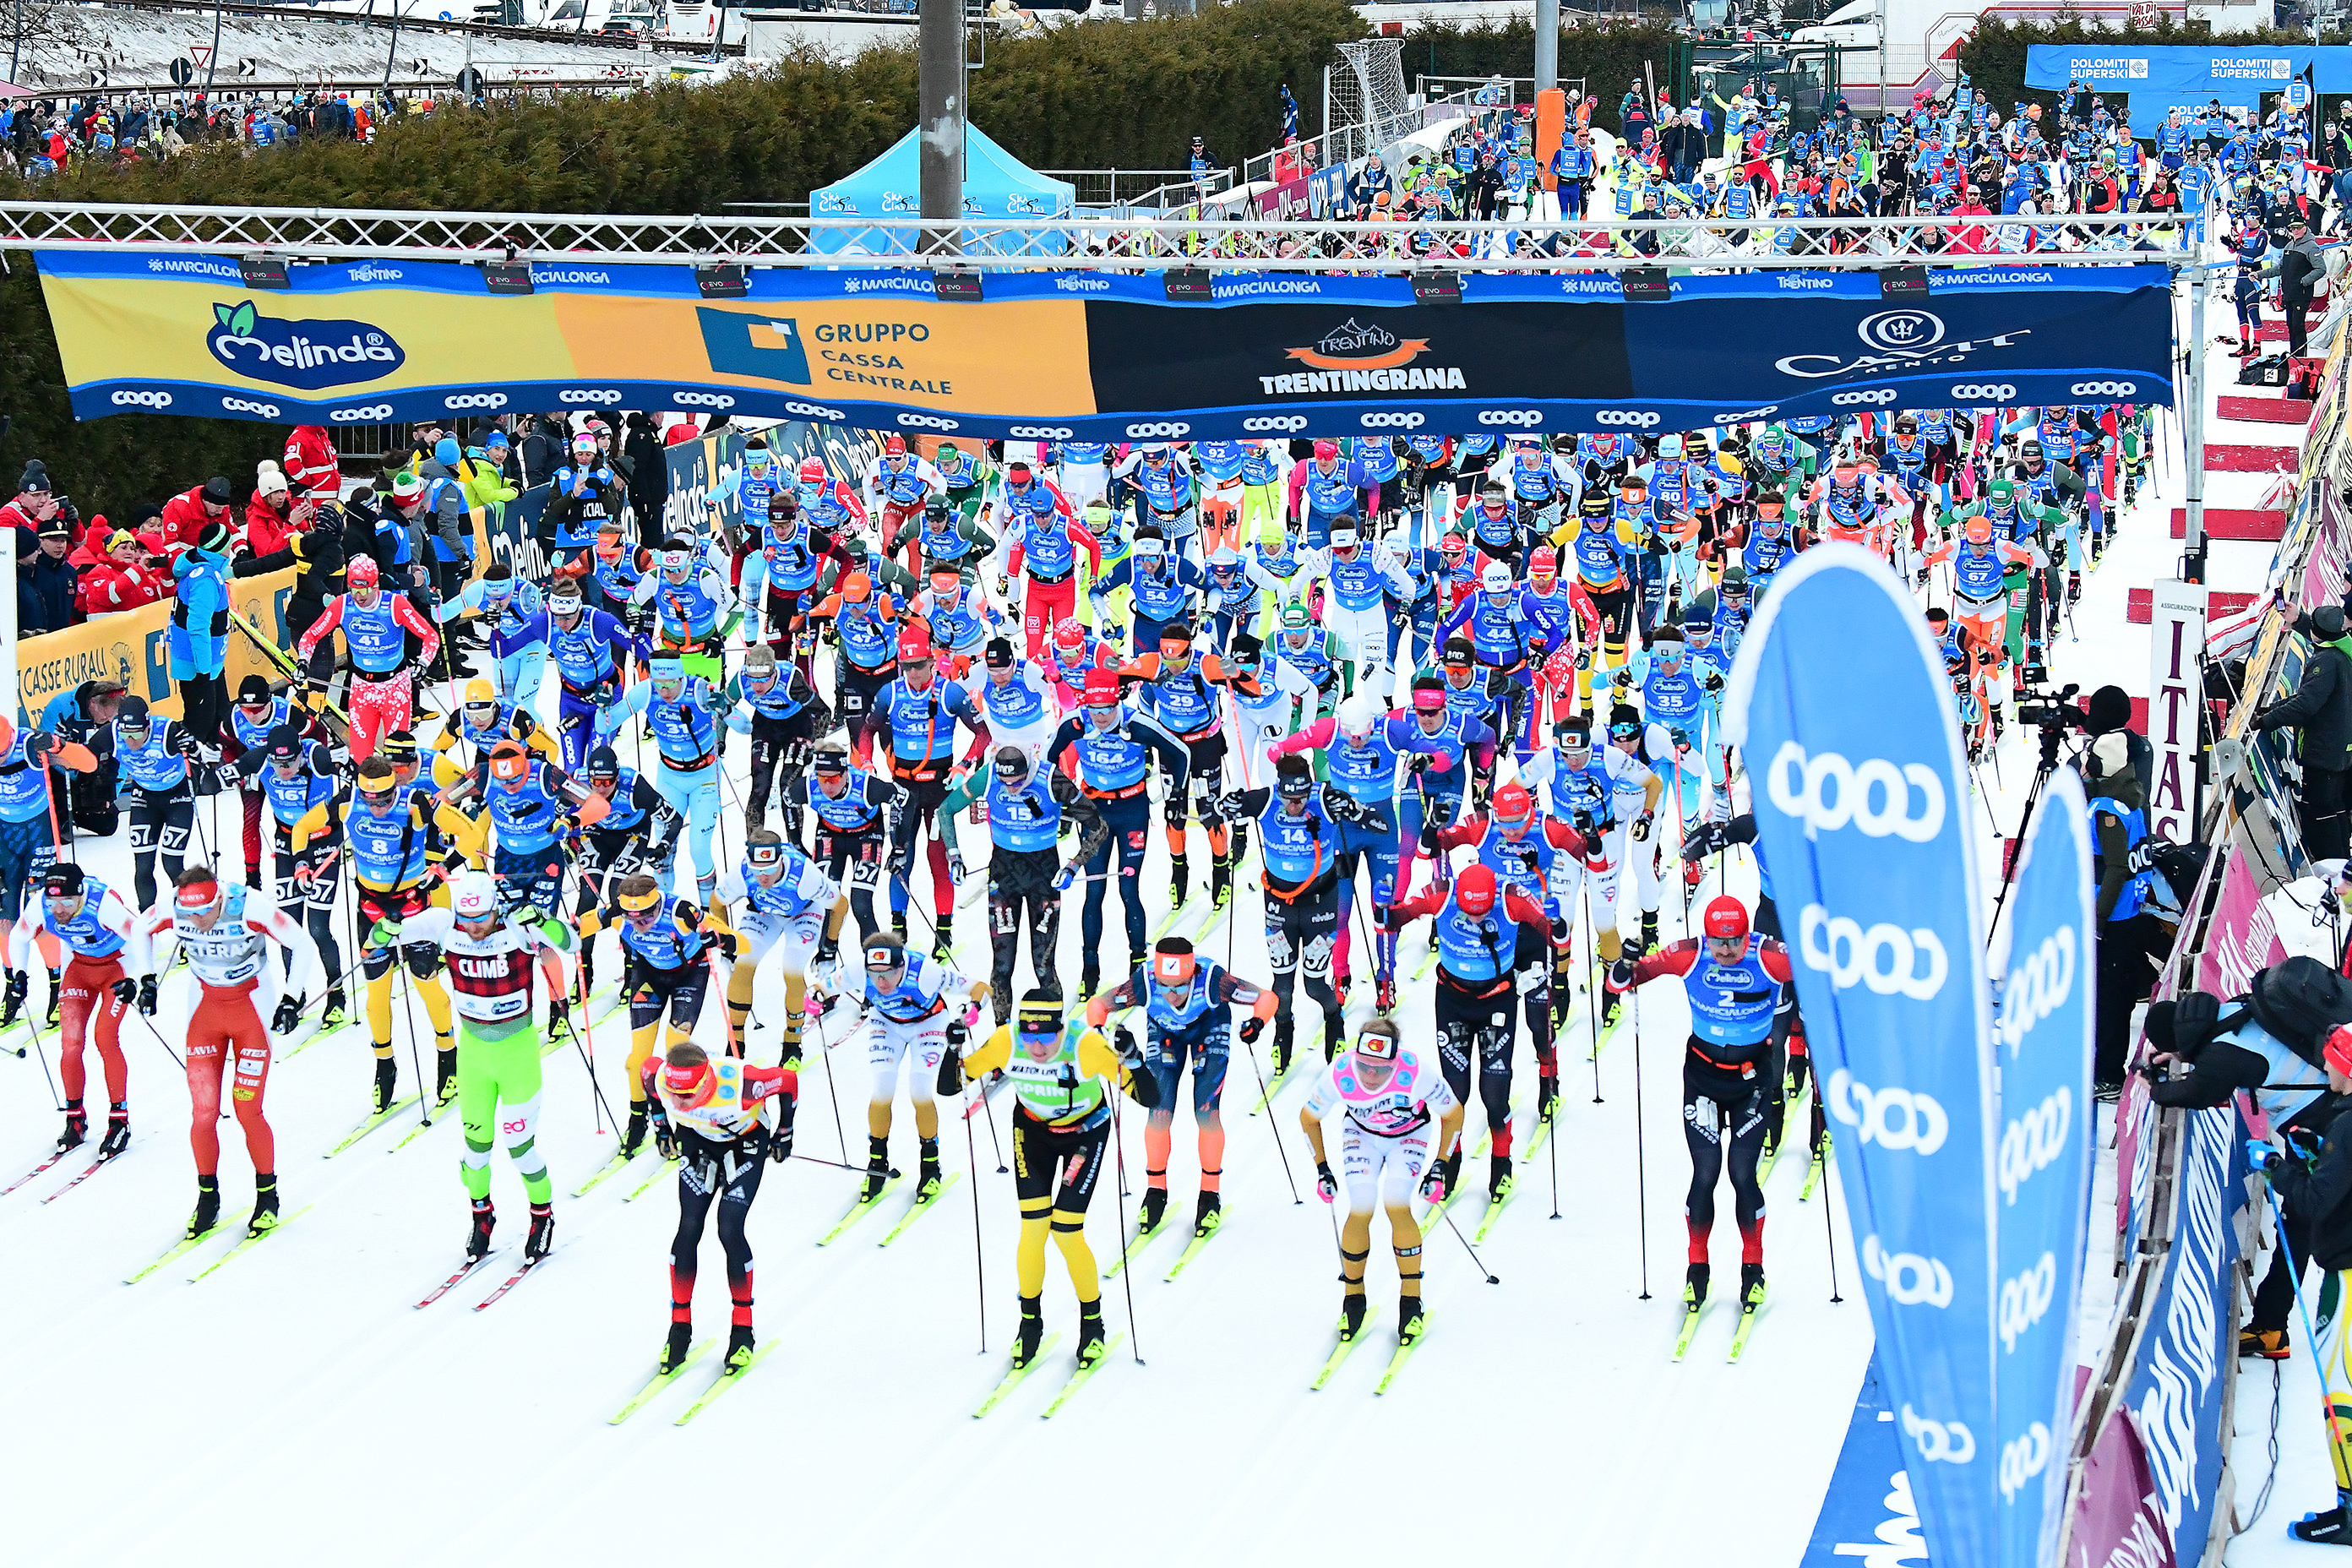 How to time a Cross Country Skiing Race